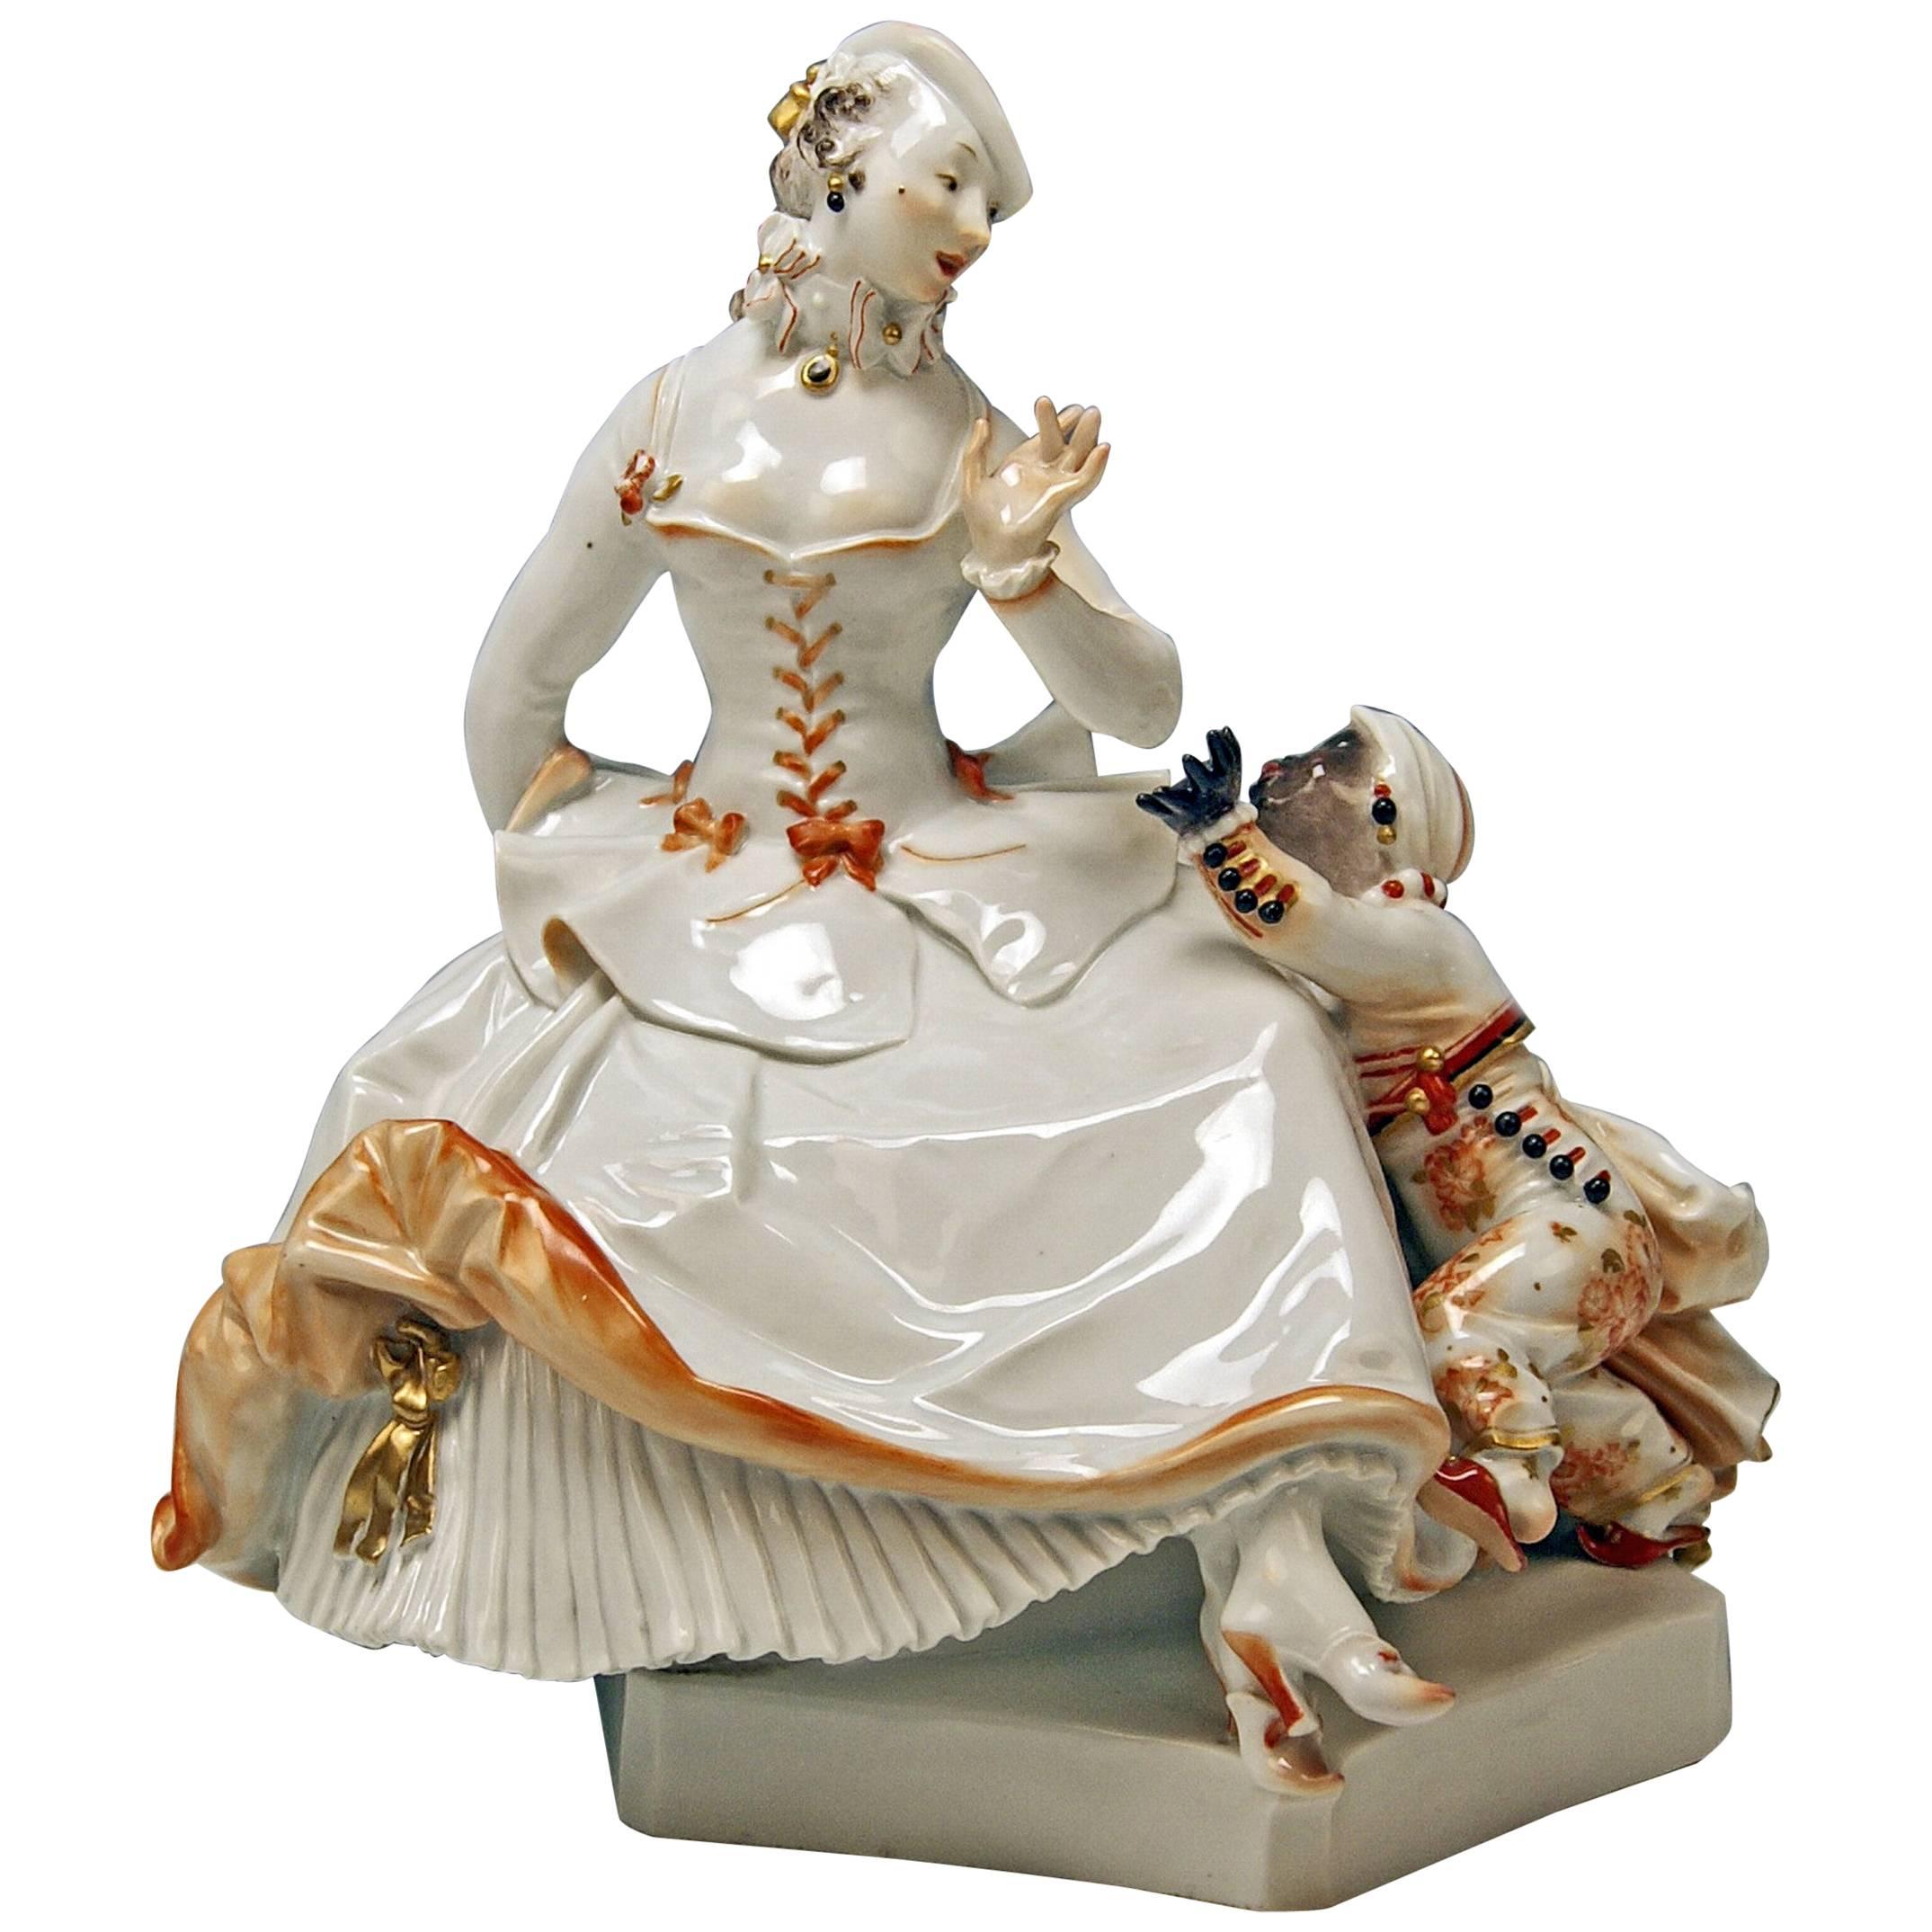 Meissen Figurine Group Lady and Black Boy by Paul Scheurich made c.1920-21